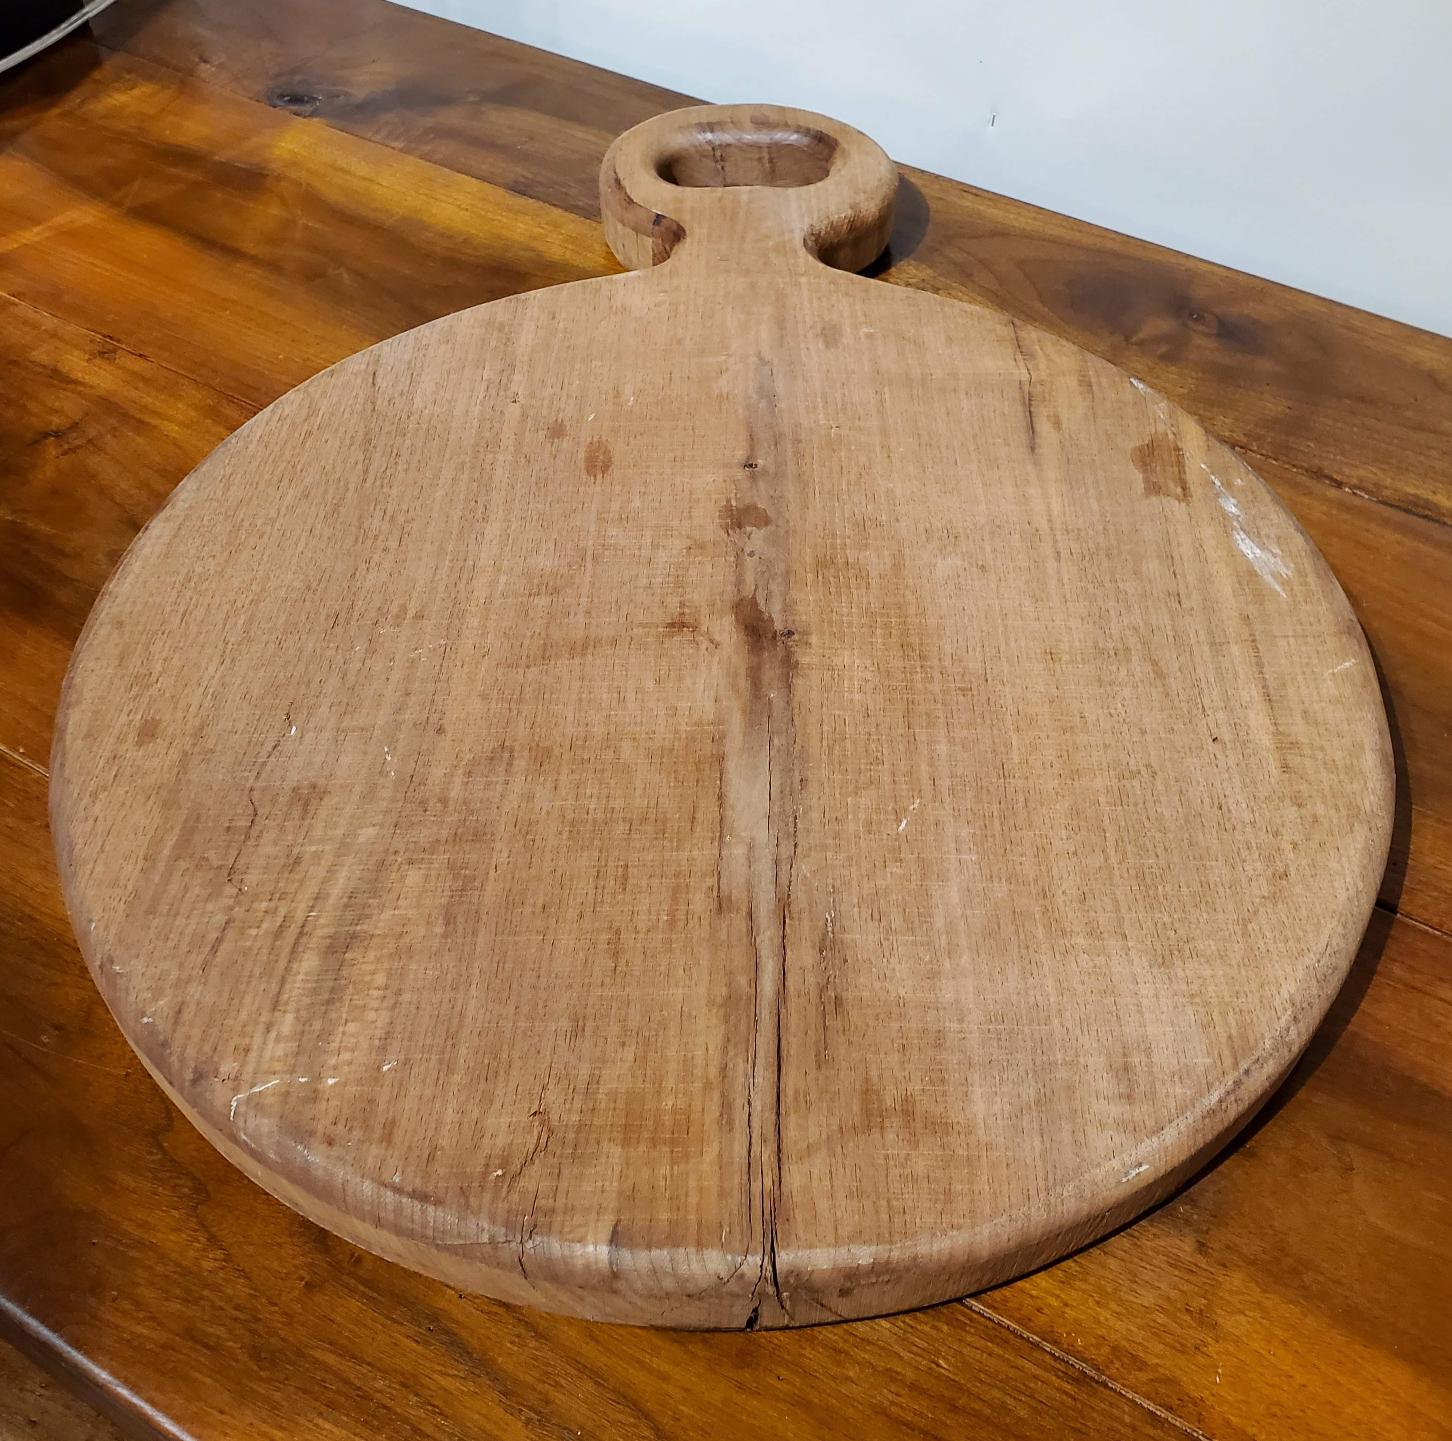 Modern Bread Board made from one large piece of Virginia Black Walnut. Use it for its original purpose, as a charcuterie board during parties or just hang on the kitchen wall for a rustic looking decoration. This bread board is study and has some